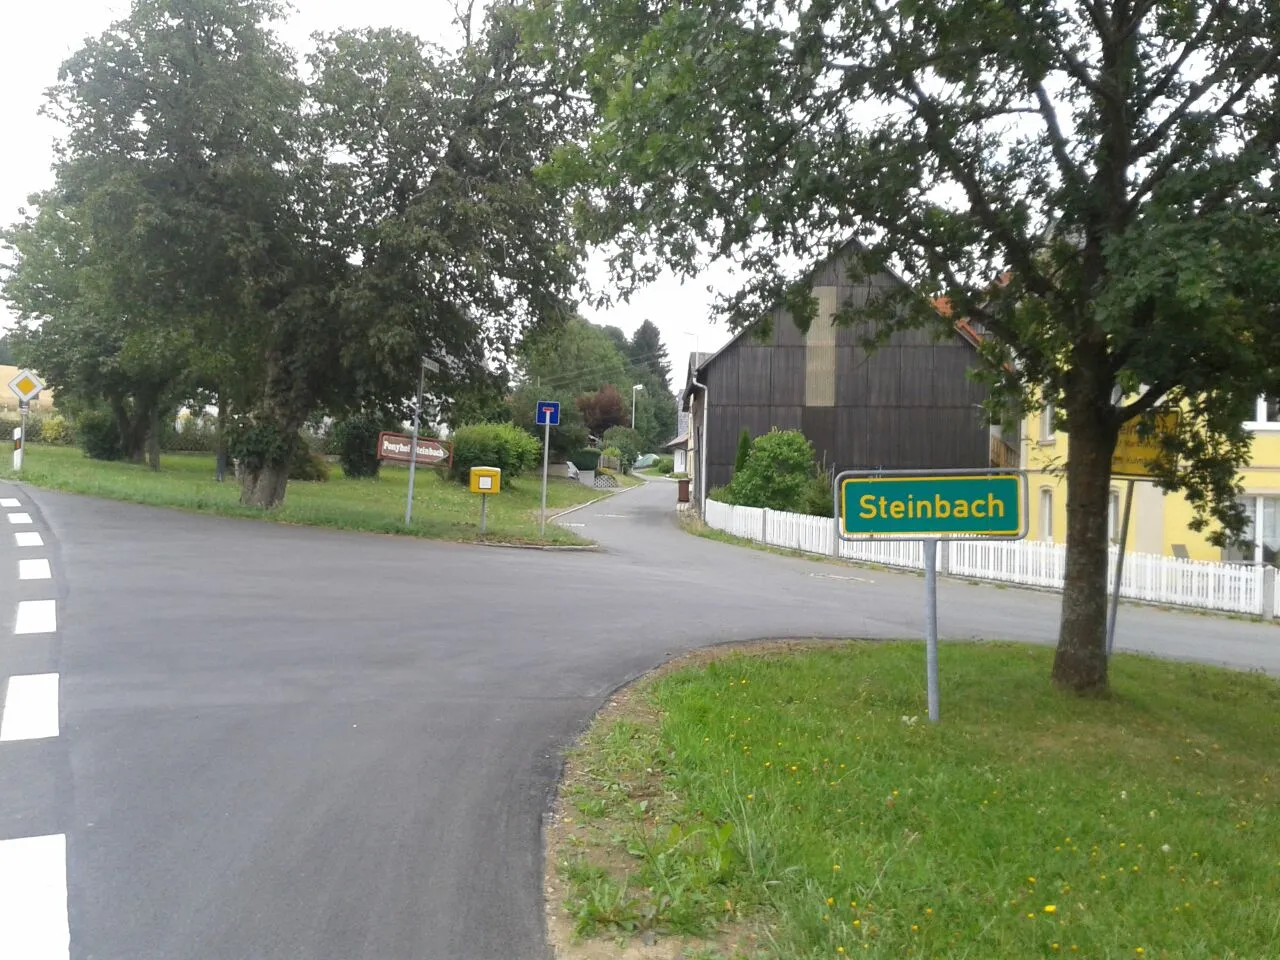 Image of Steinbach